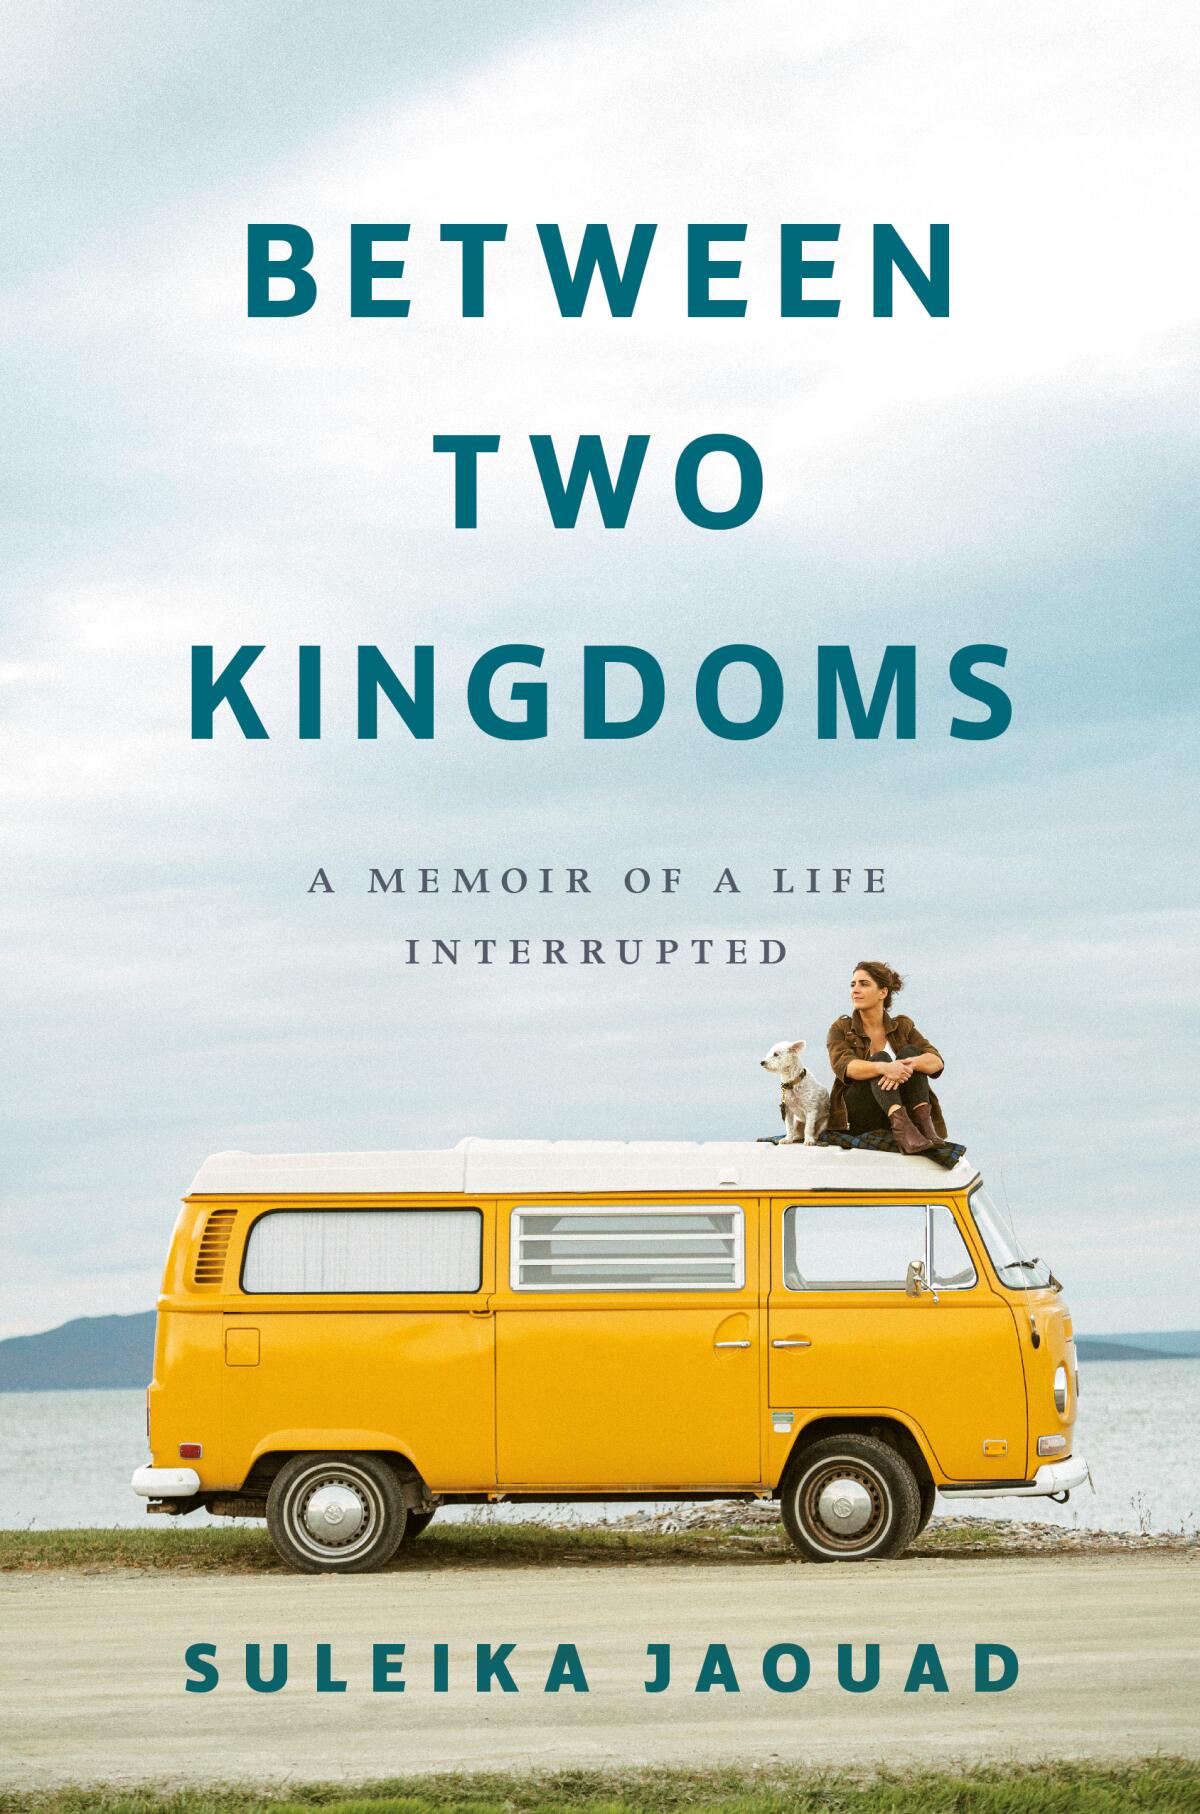 "Between Two Kingdoms," by Suleika Jaouad